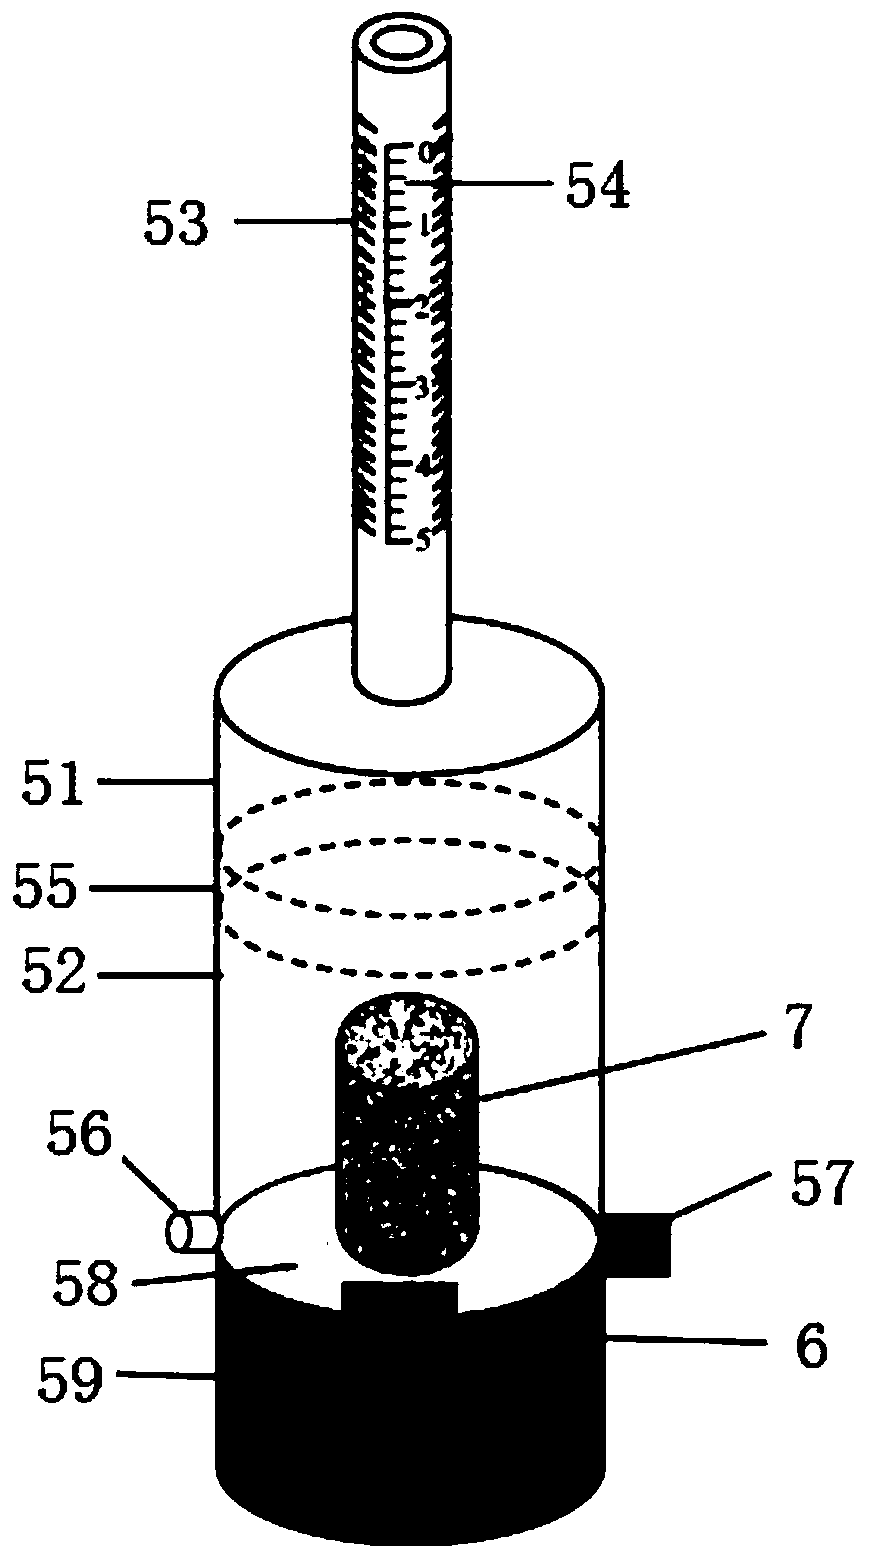 Imbibition device for performing spontaneous imbibition on-line monitoring in combination with nuclear magnetic resonance technology